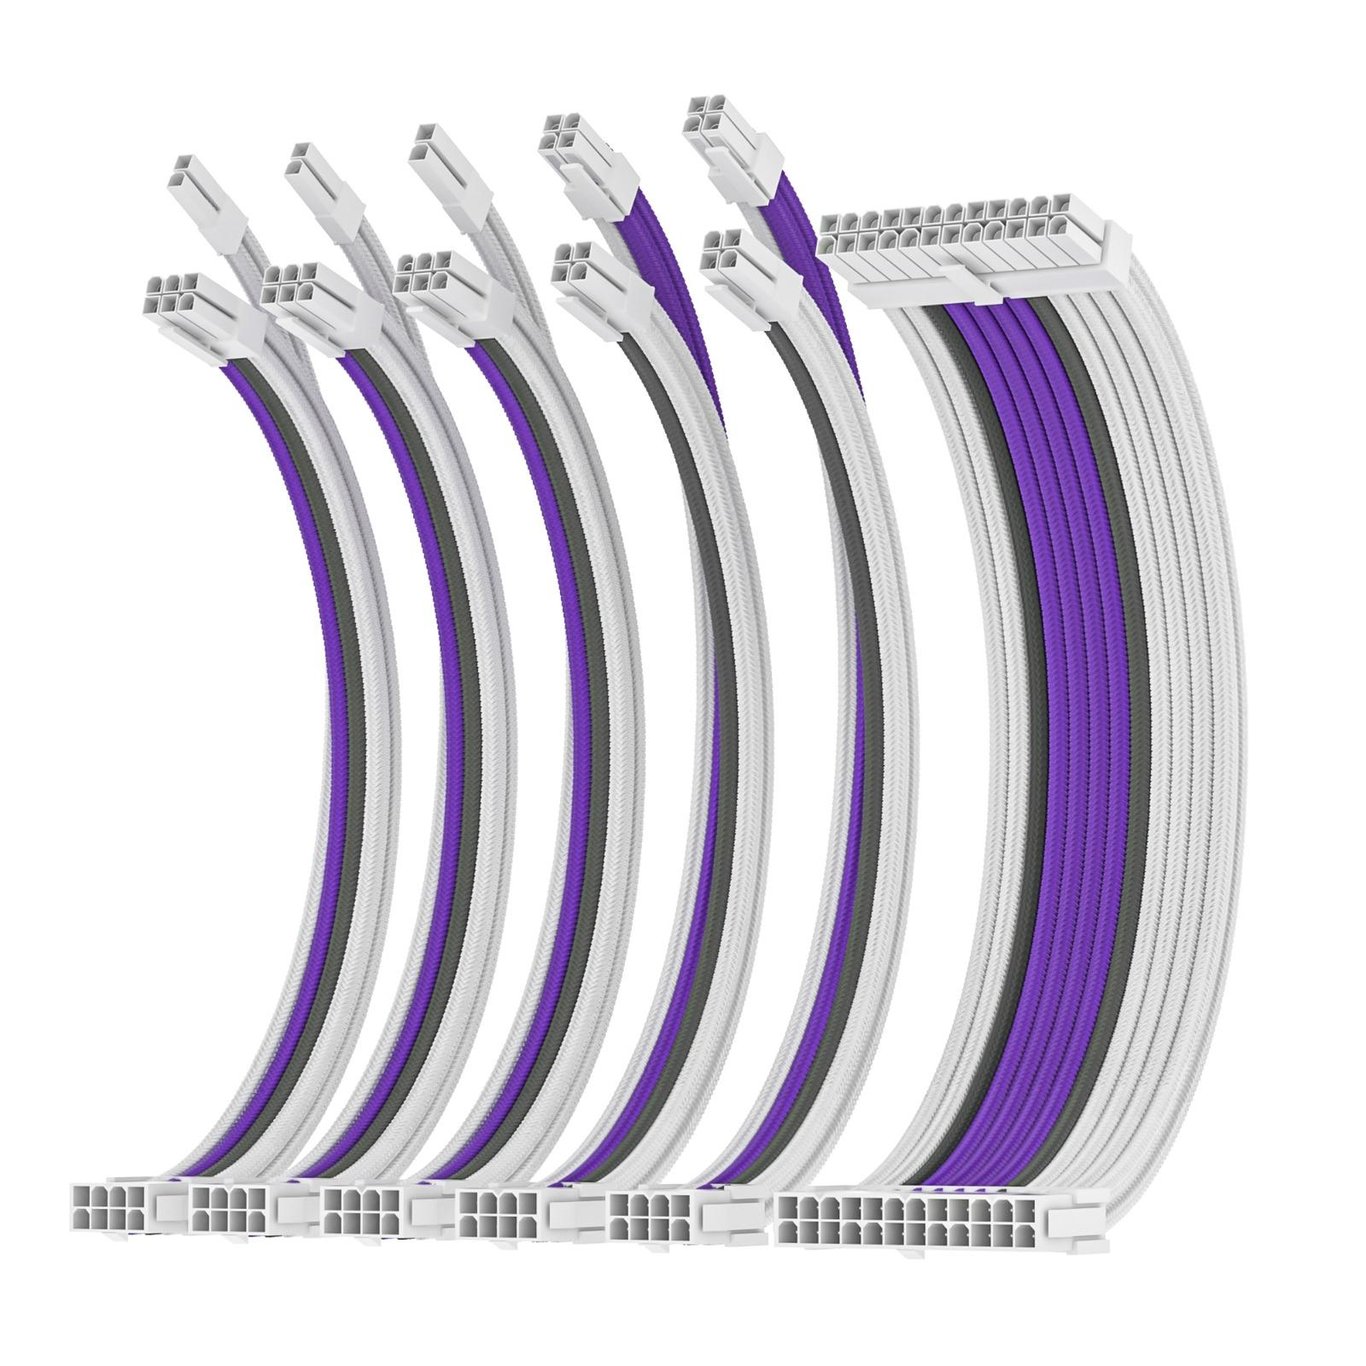 AsiaHorse Pro-6 Sleeved Extension Cable Kit - Snow Violet